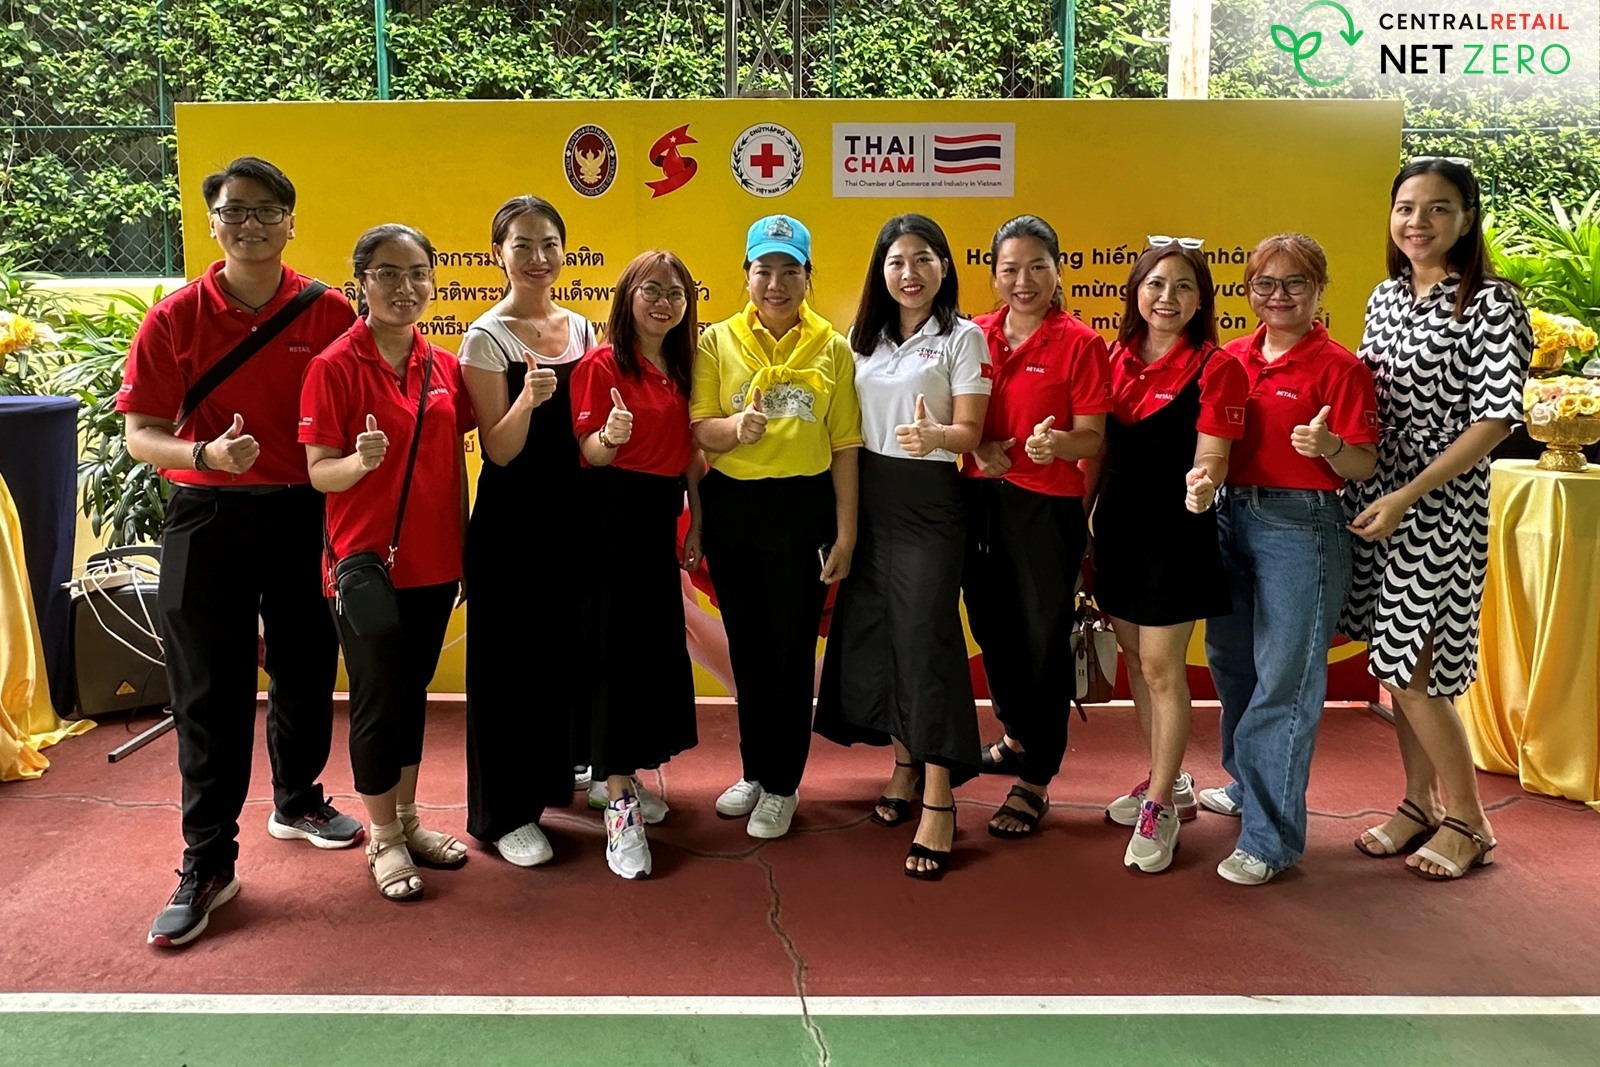 Central Retail Vietnam showcases community spirit with blood donation drive